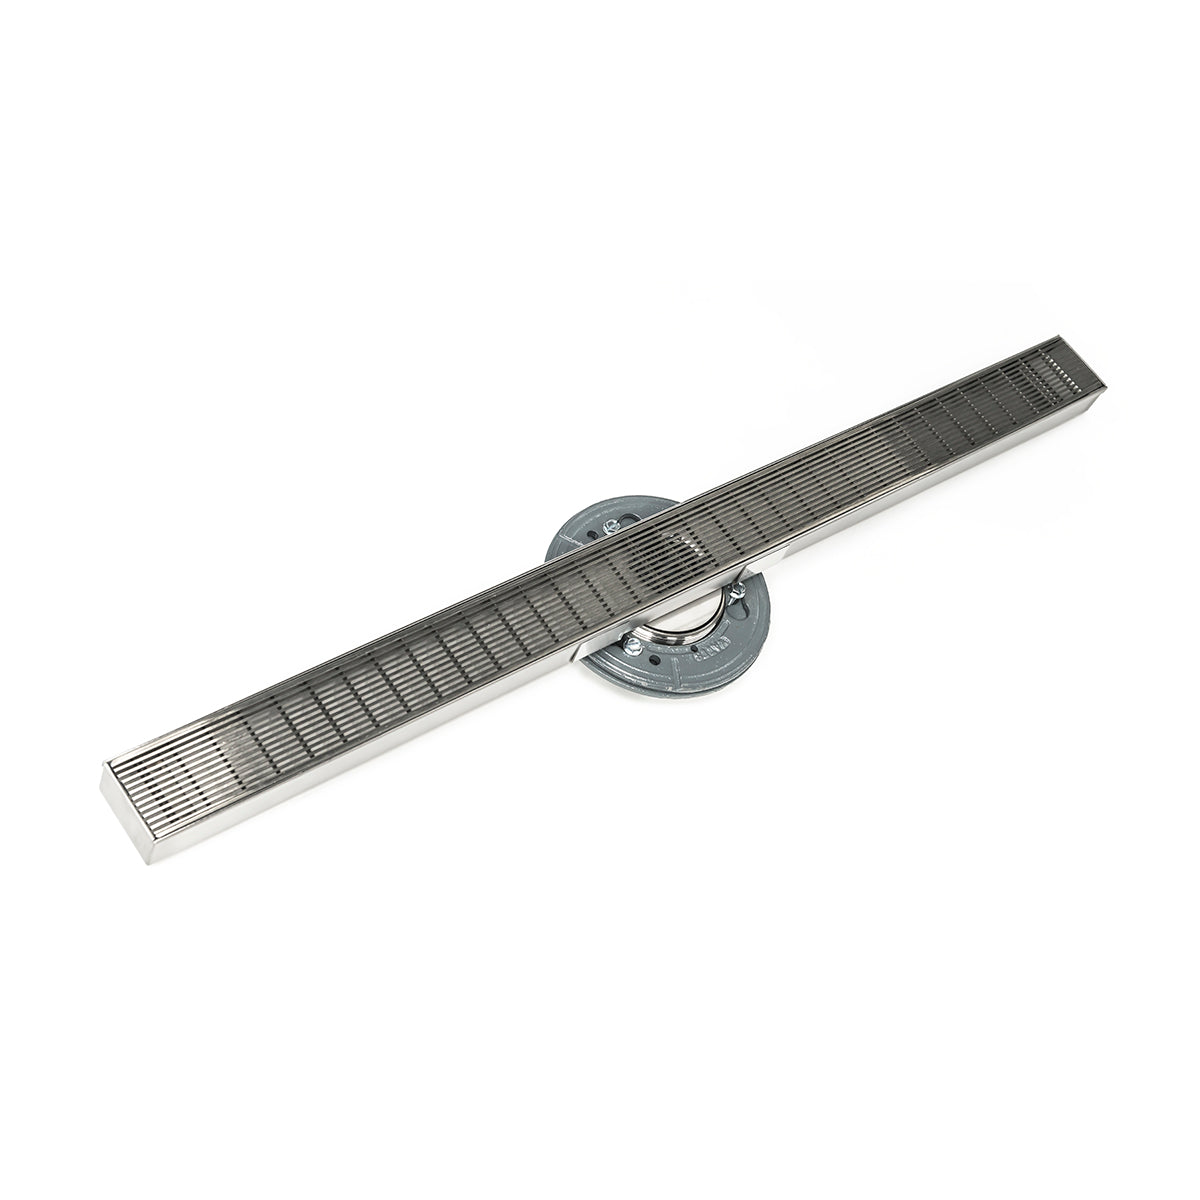 Infinity Drain 96" S-Stainless Steel Series High Flow Site Sizable Linear Drain Kit with 2 1/2" Wedge Wire Grate with ABS Drain Body, 3" Outlet